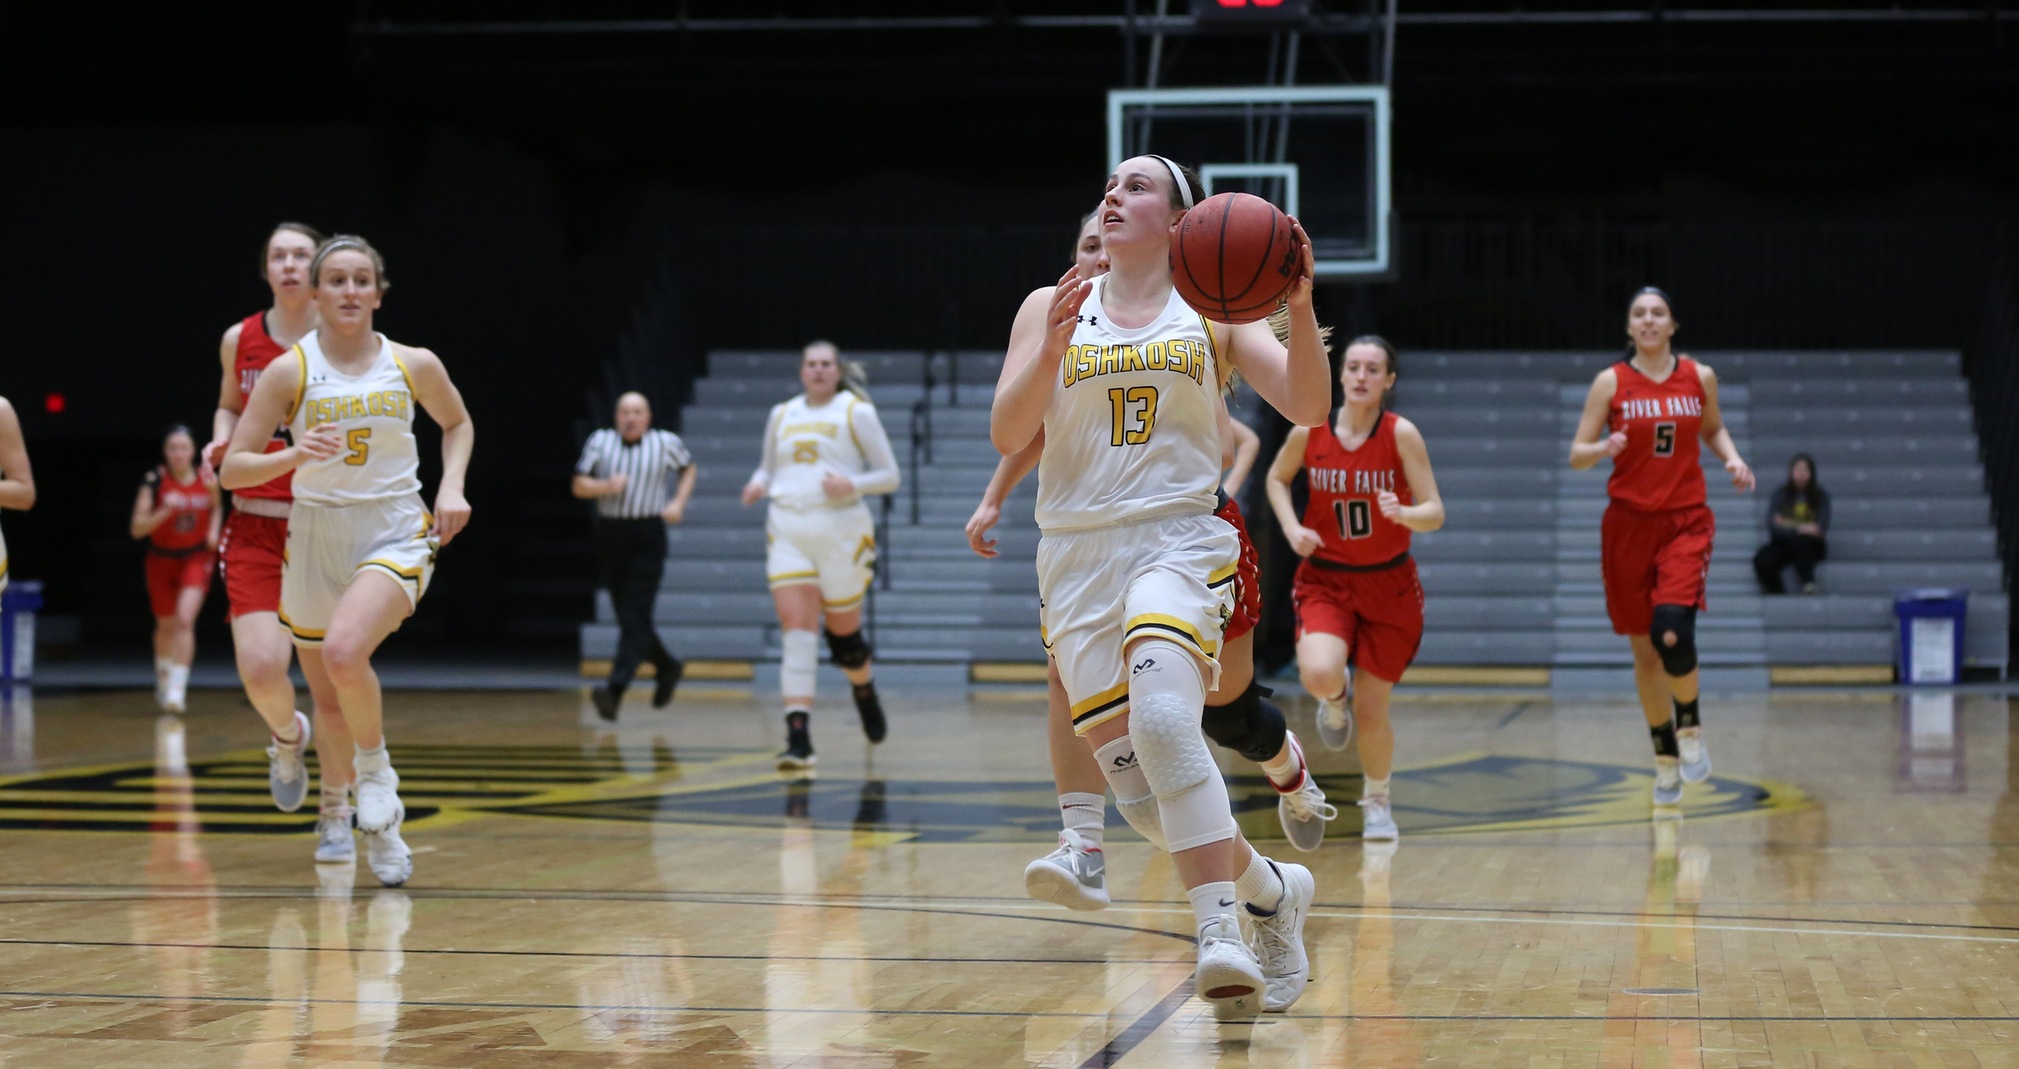 Katie Ludwig scored a career-high 23 points against the Falcons by making 6 of 7 shots from the field all eight free throws.